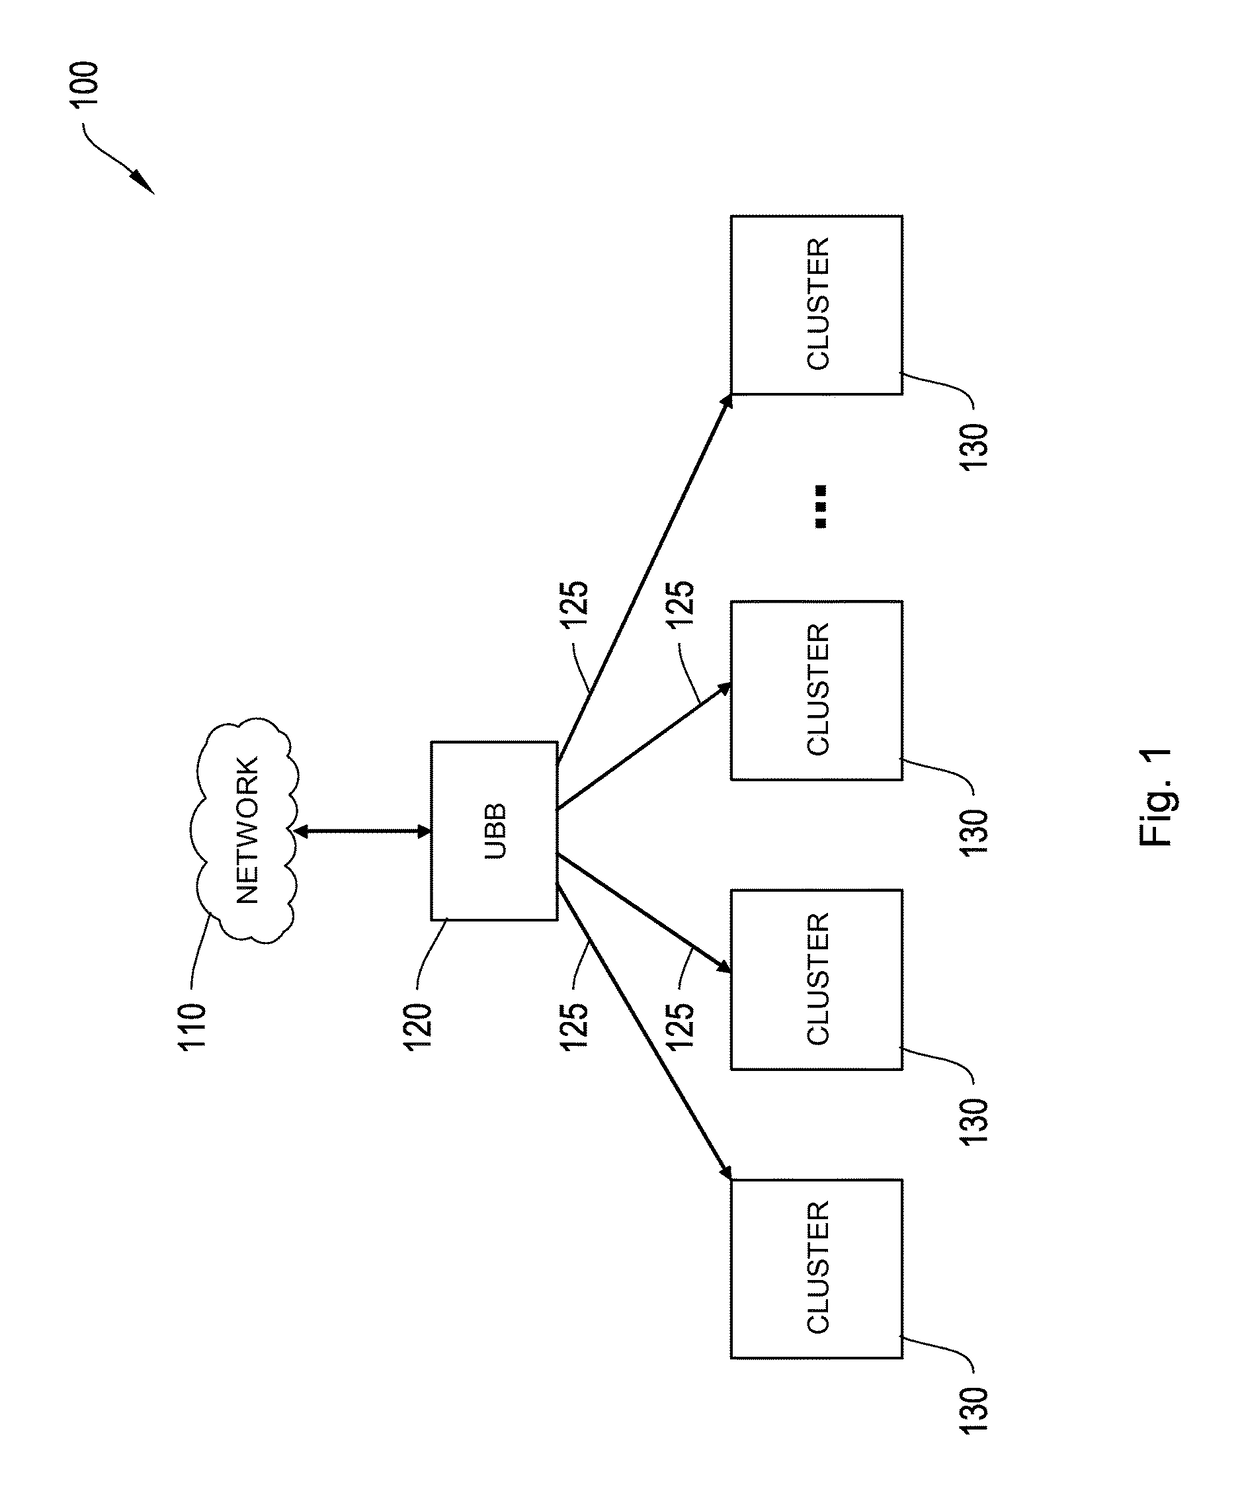 System and methods for utilization-based balancing of traffic to an information retrieval system